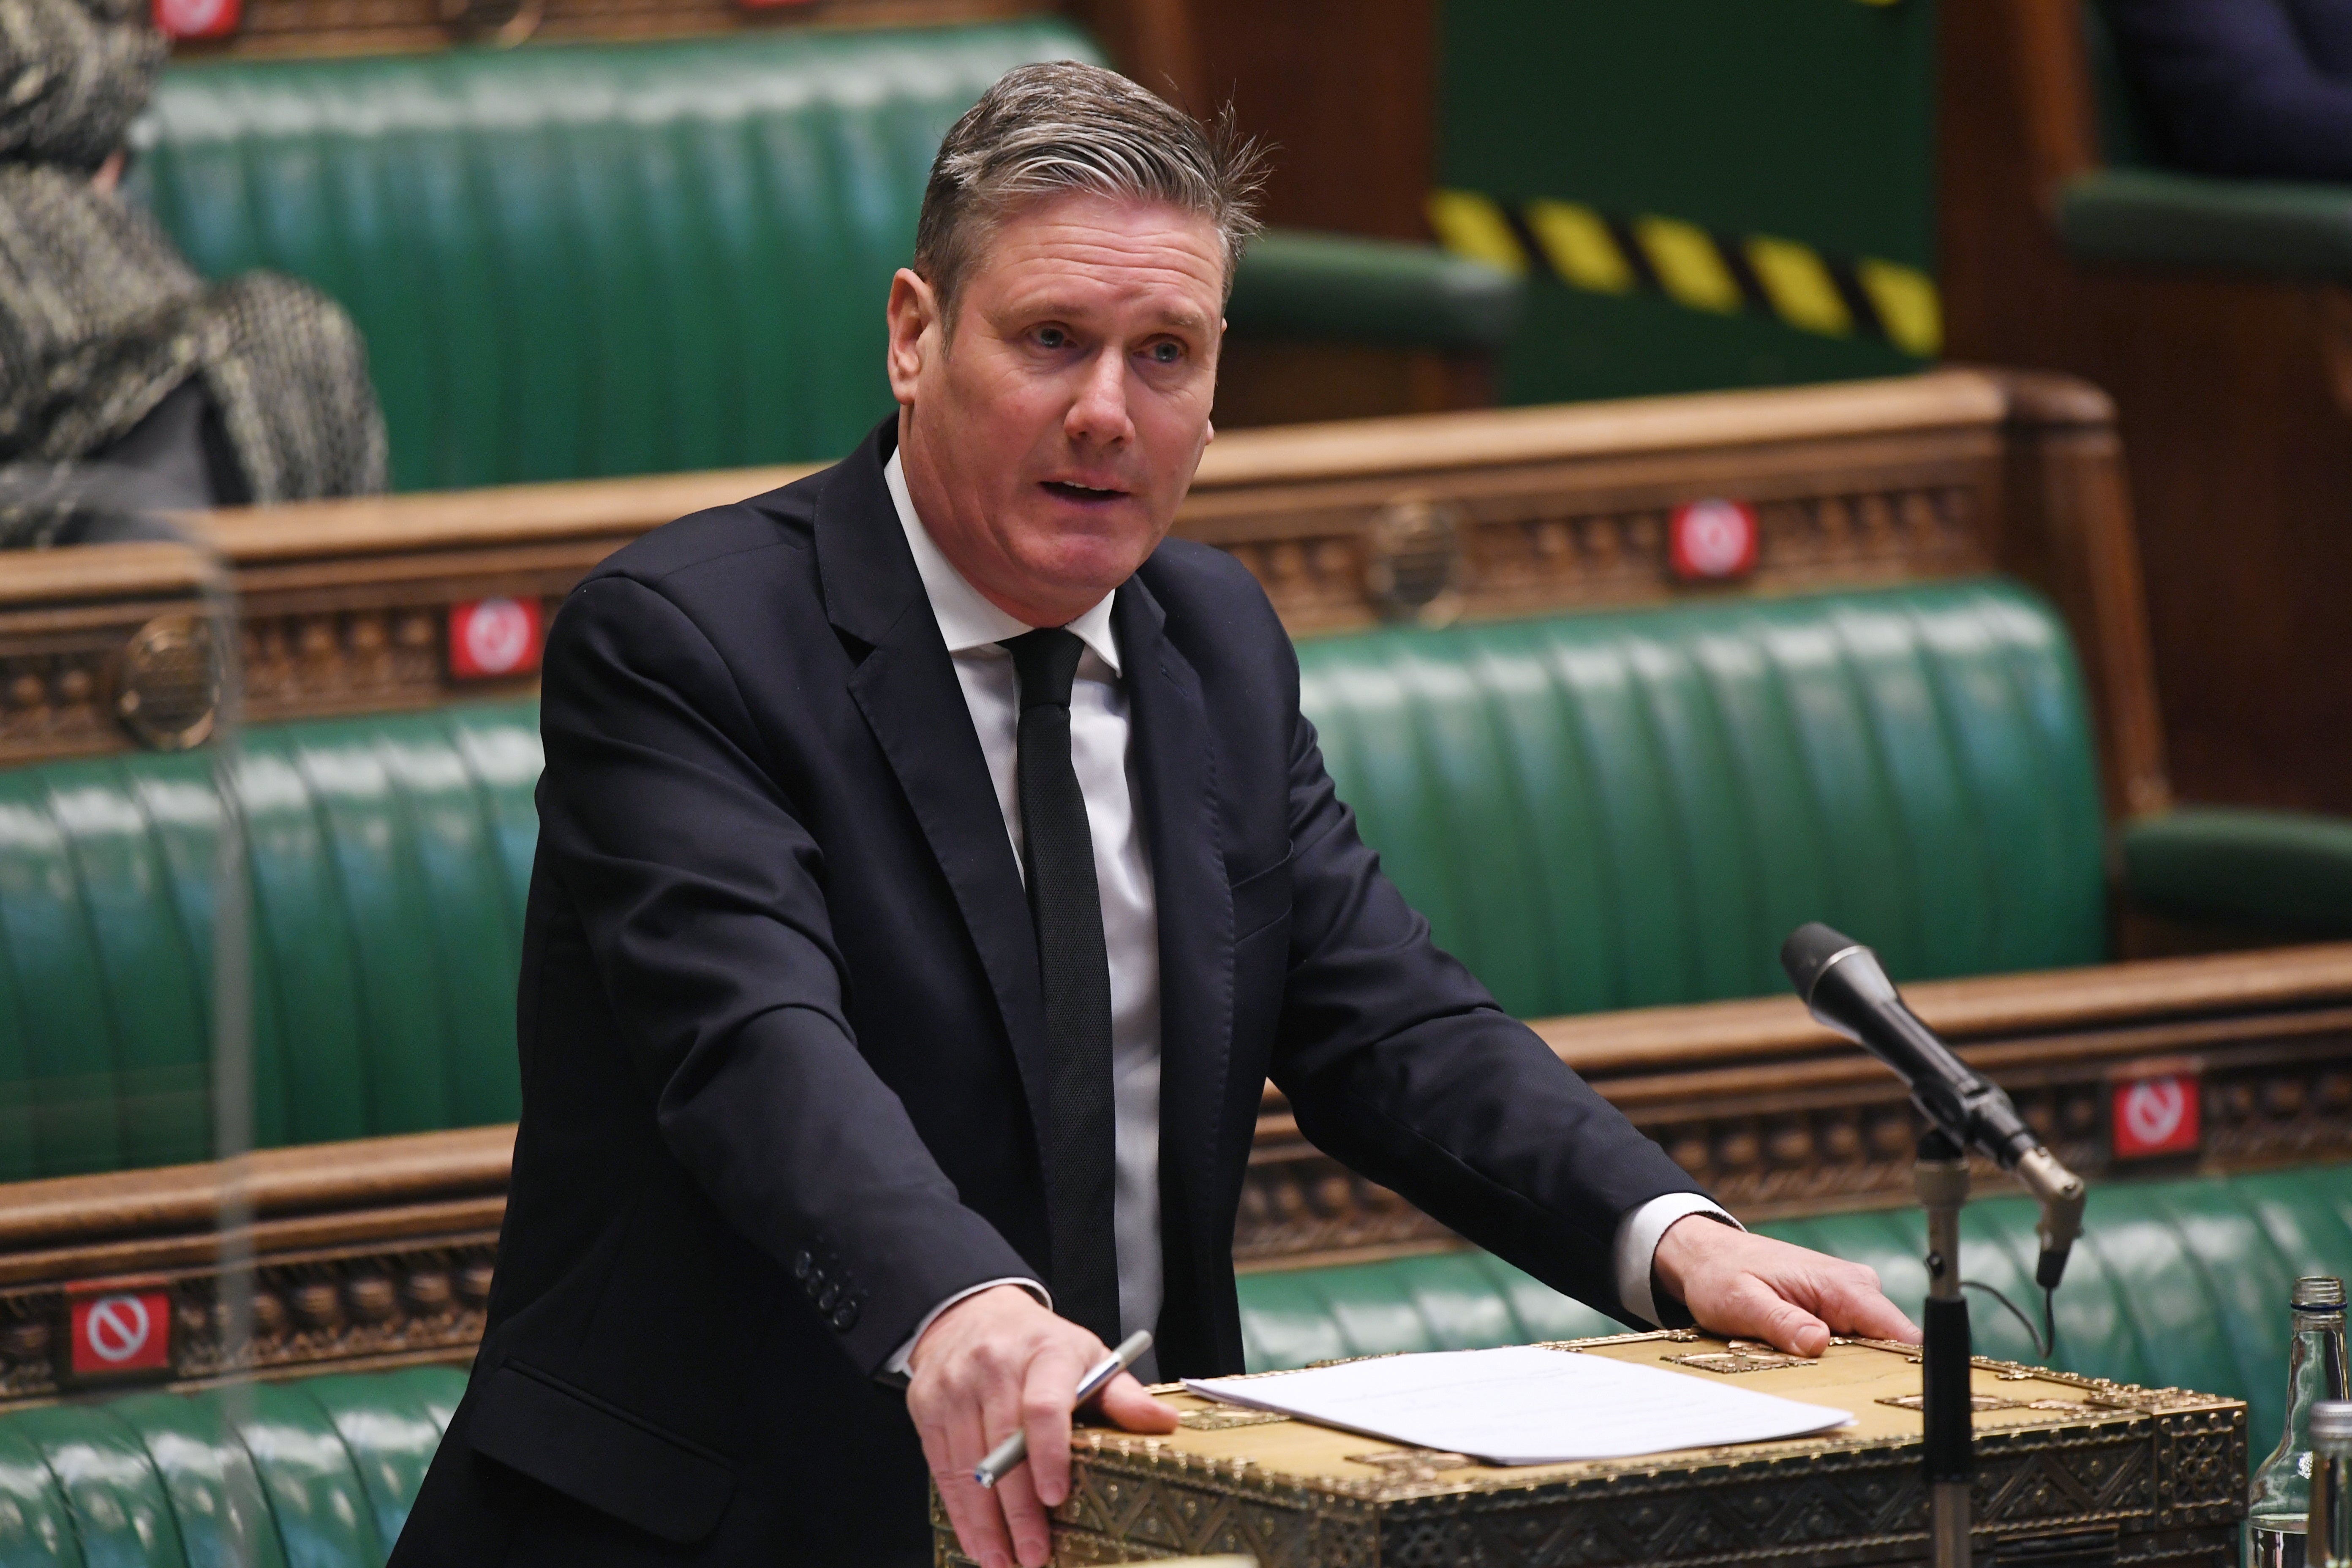 An inquiry will follow Starmer’s intervention